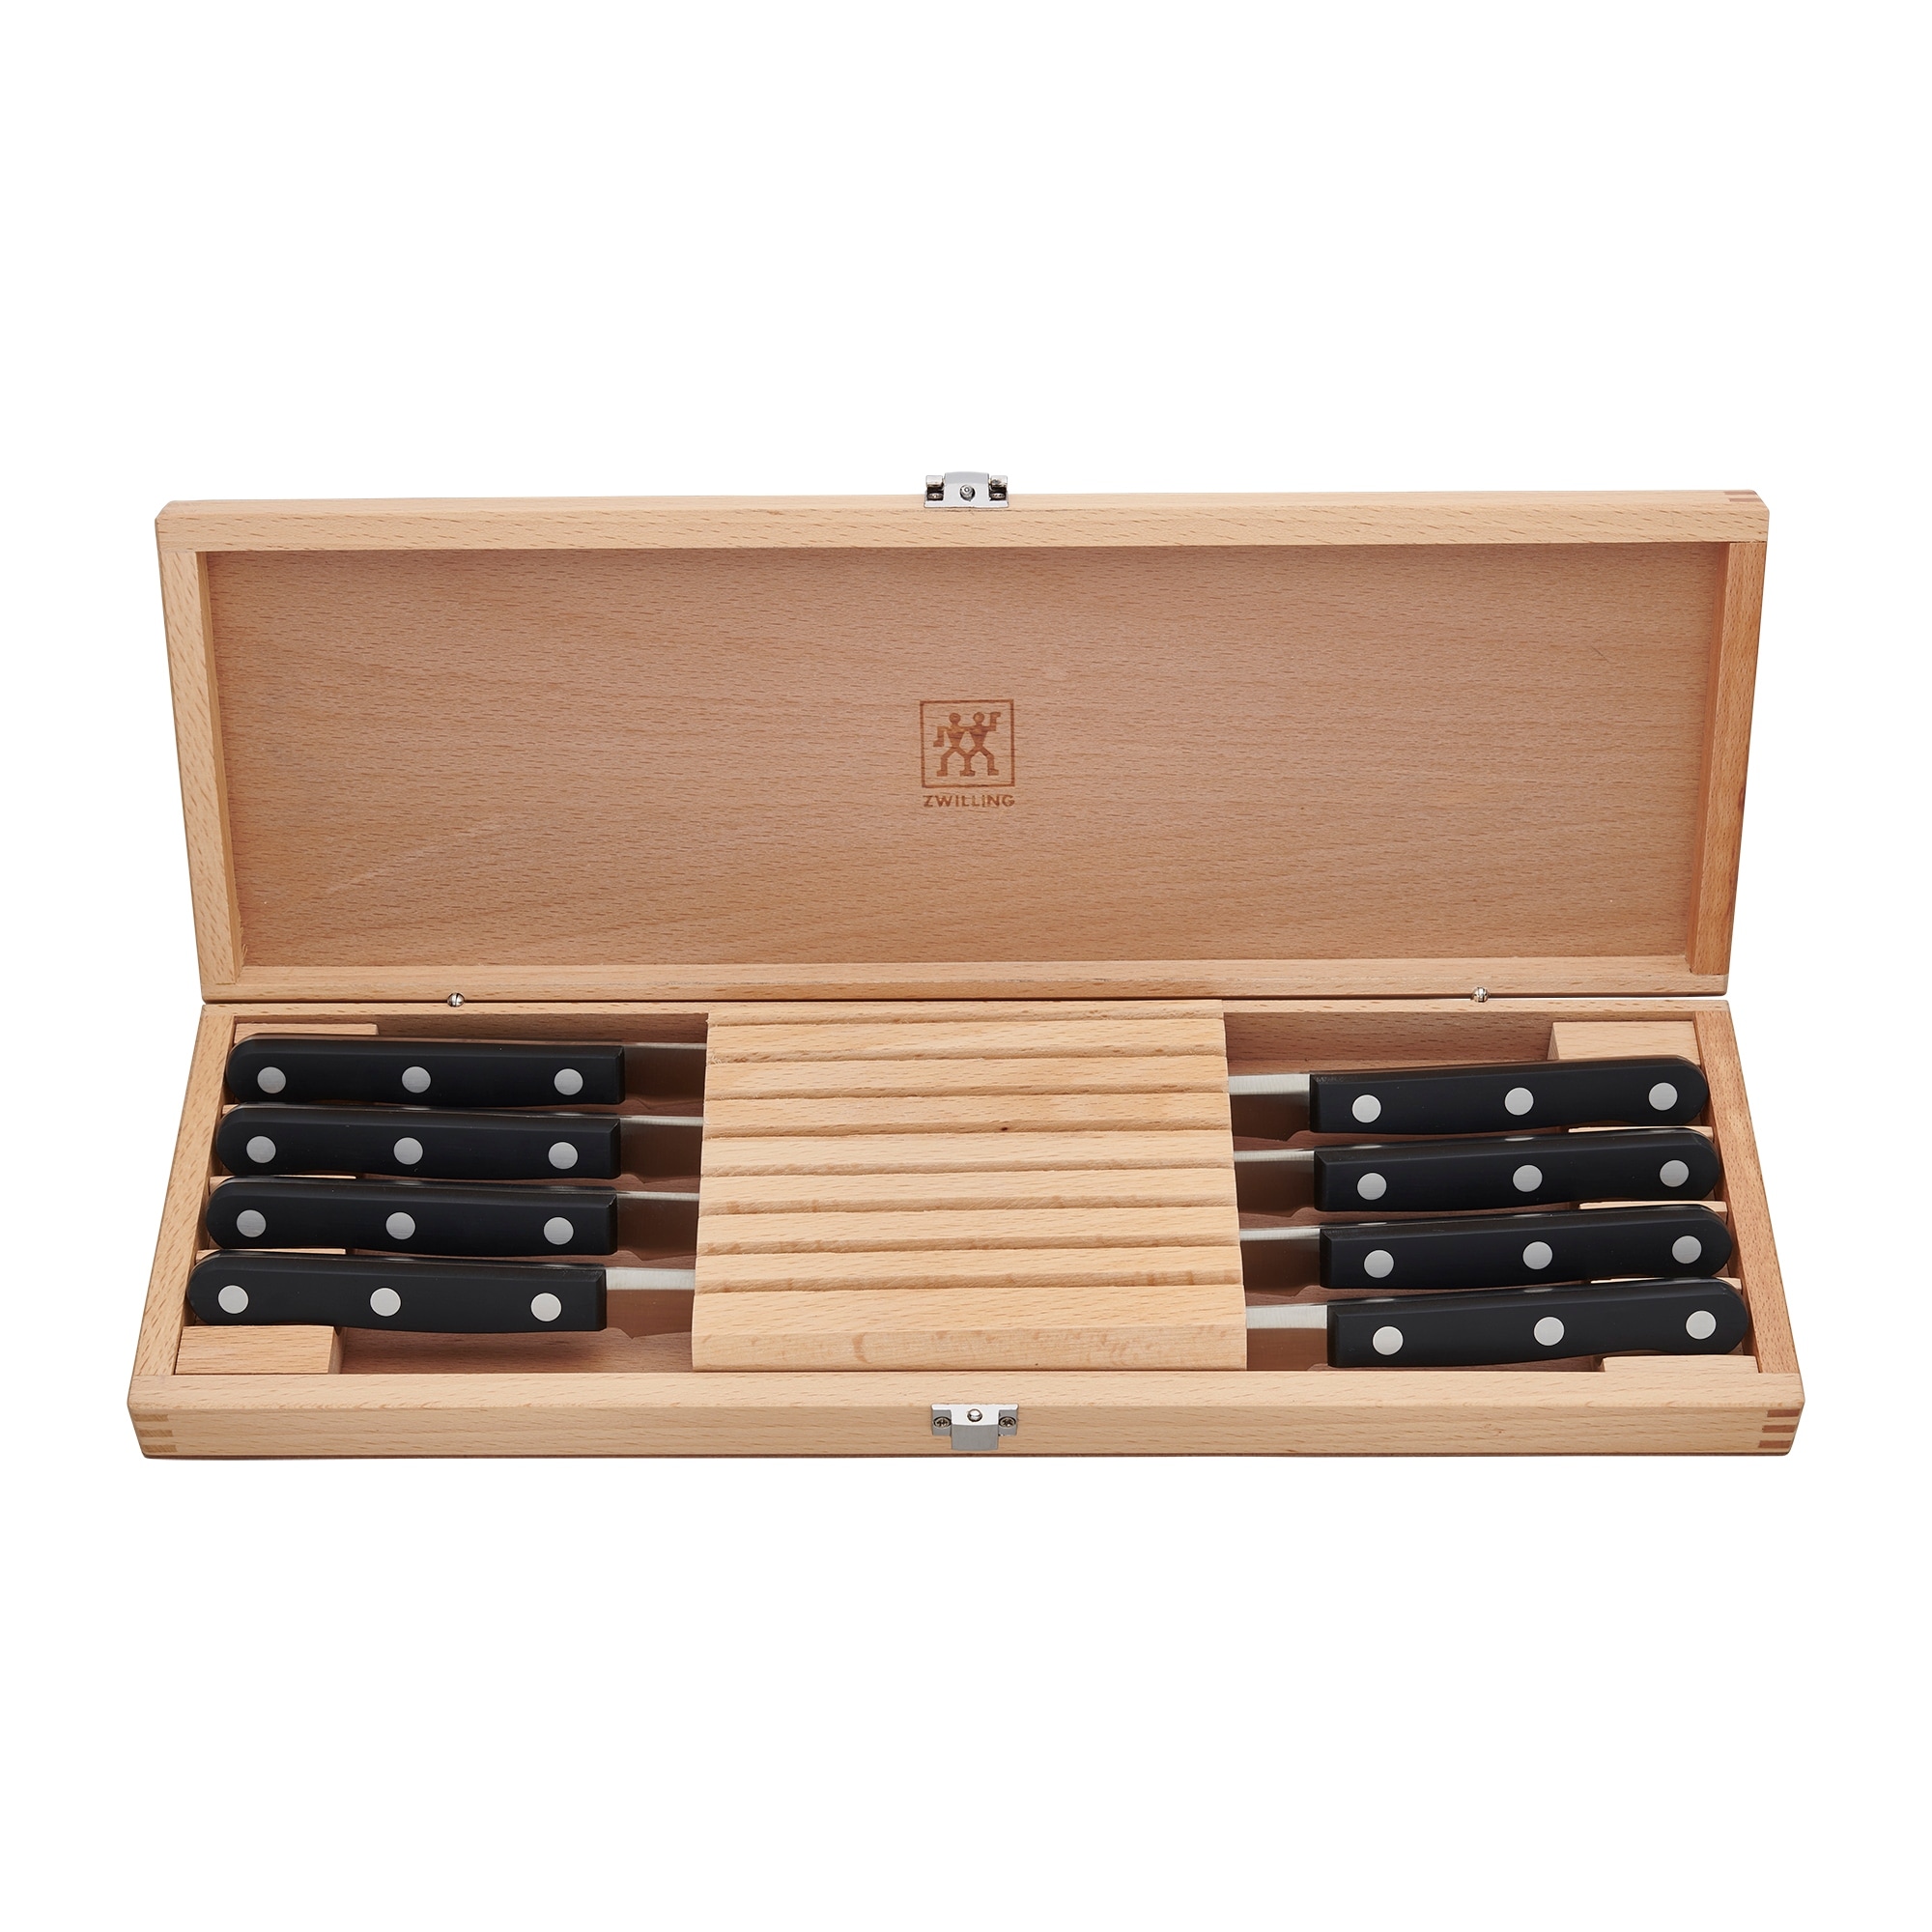 https://ak1.ostkcdn.com/images/products/is/images/direct/a2e5cd3dca7e9963df0b78374ea3ca4b998ae65c/ZWILLING-TWIN-Gourmet-Classic-8-pc-Steak-Knife-Set-with-Wood-Case.jpg